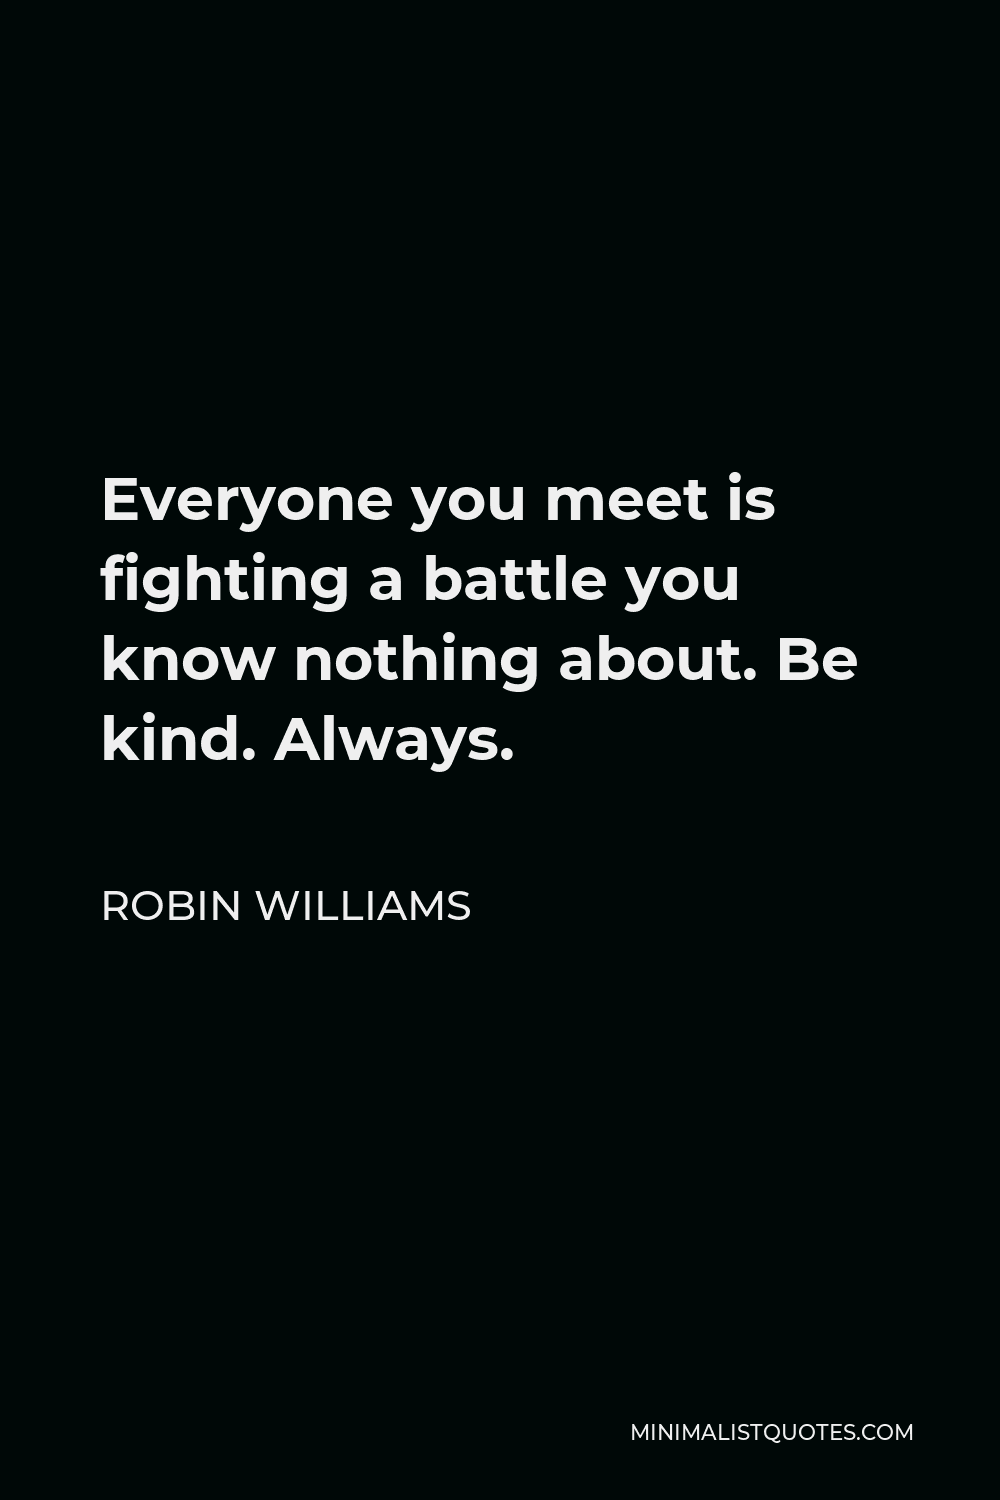 Robin Williams Quote - Everyone you meet is fighting a battle you know nothing about. Be kind. Always.